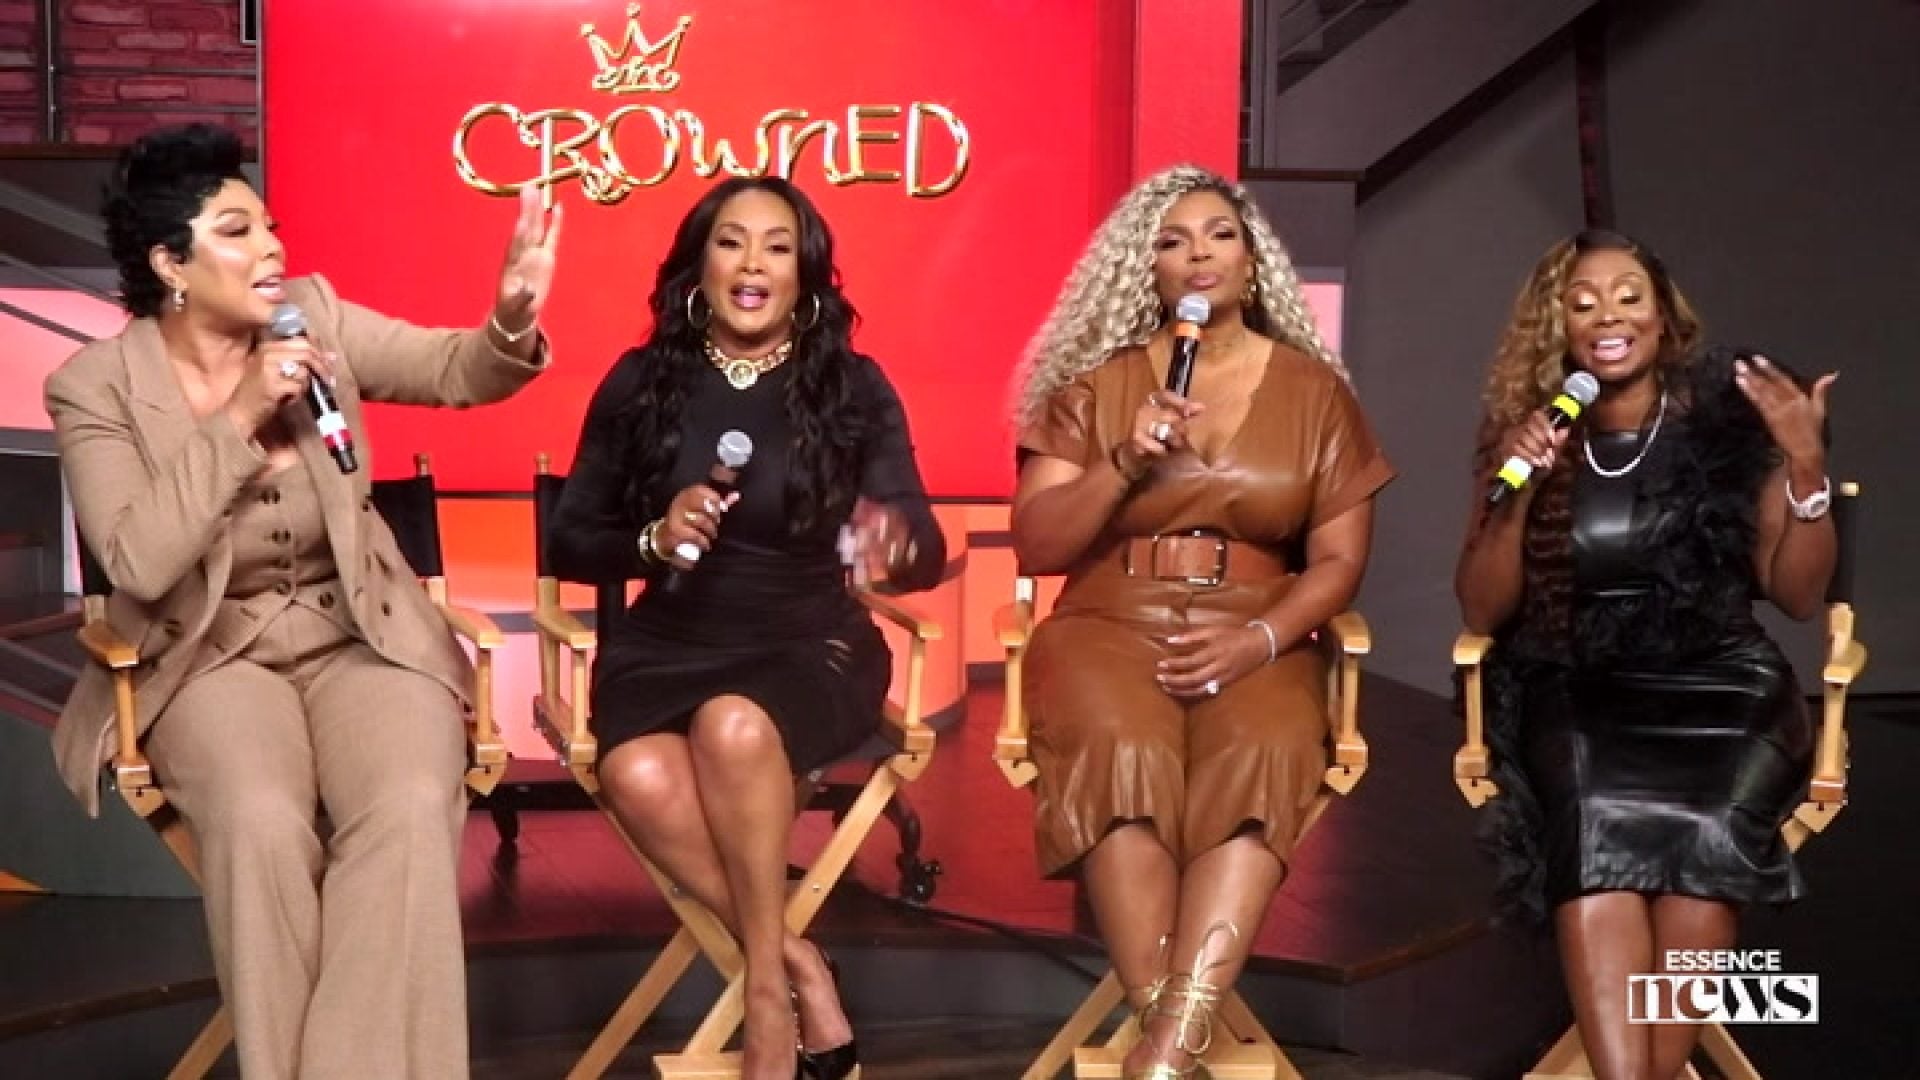 The Women Of ‘Crowned’ Discuss Brand New Talk Series